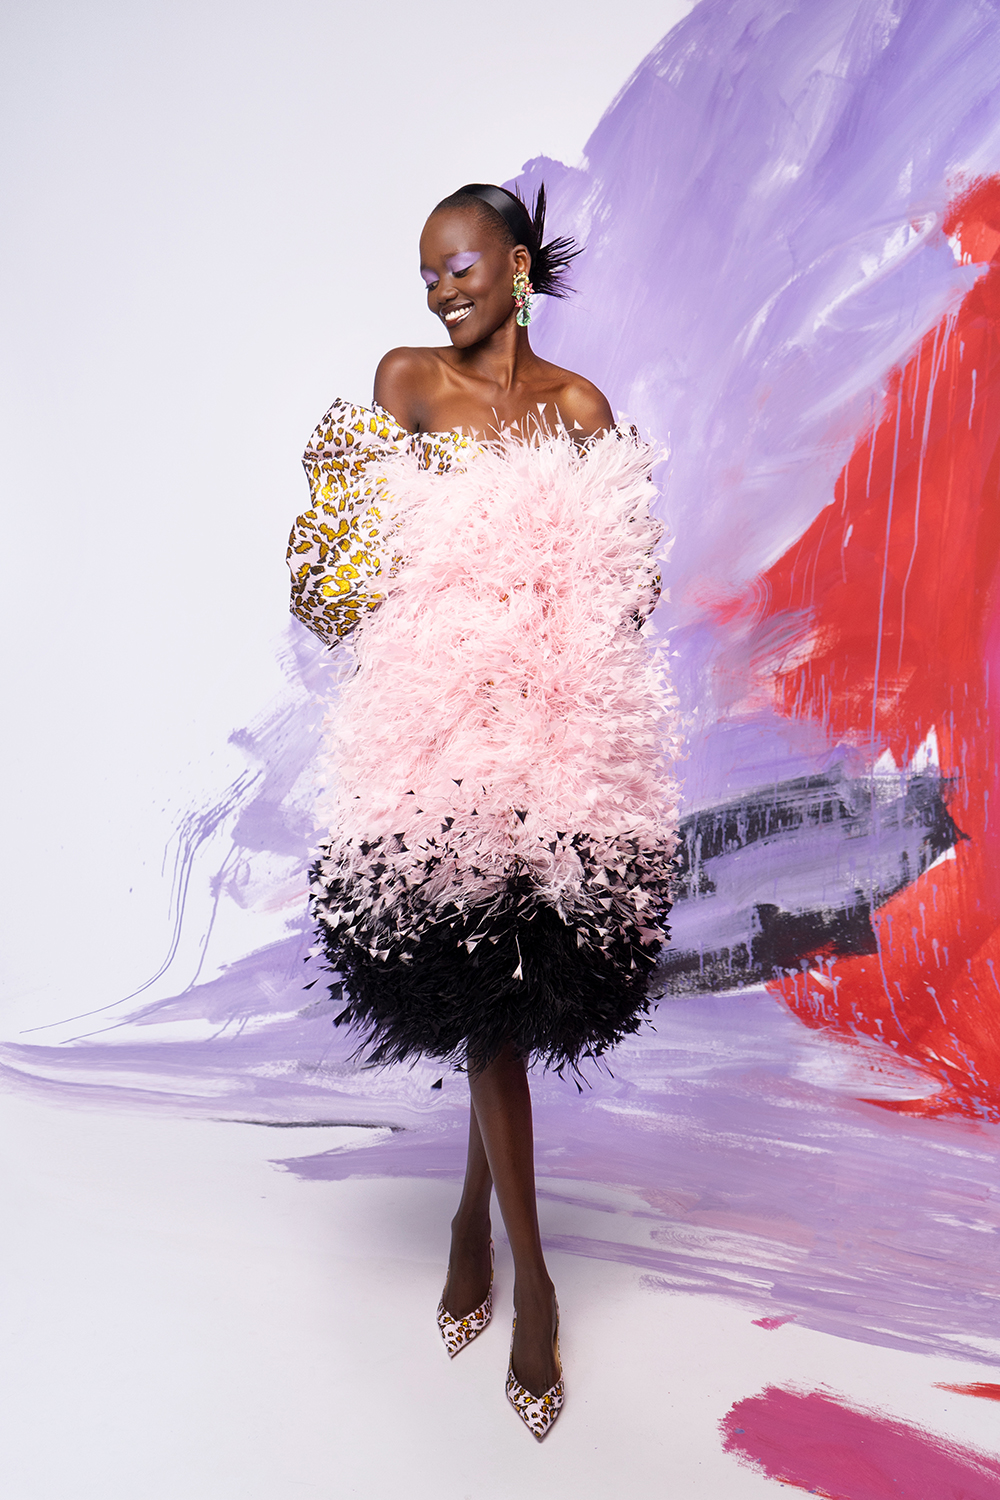 Sex and the City reboot: Halpern feather dress